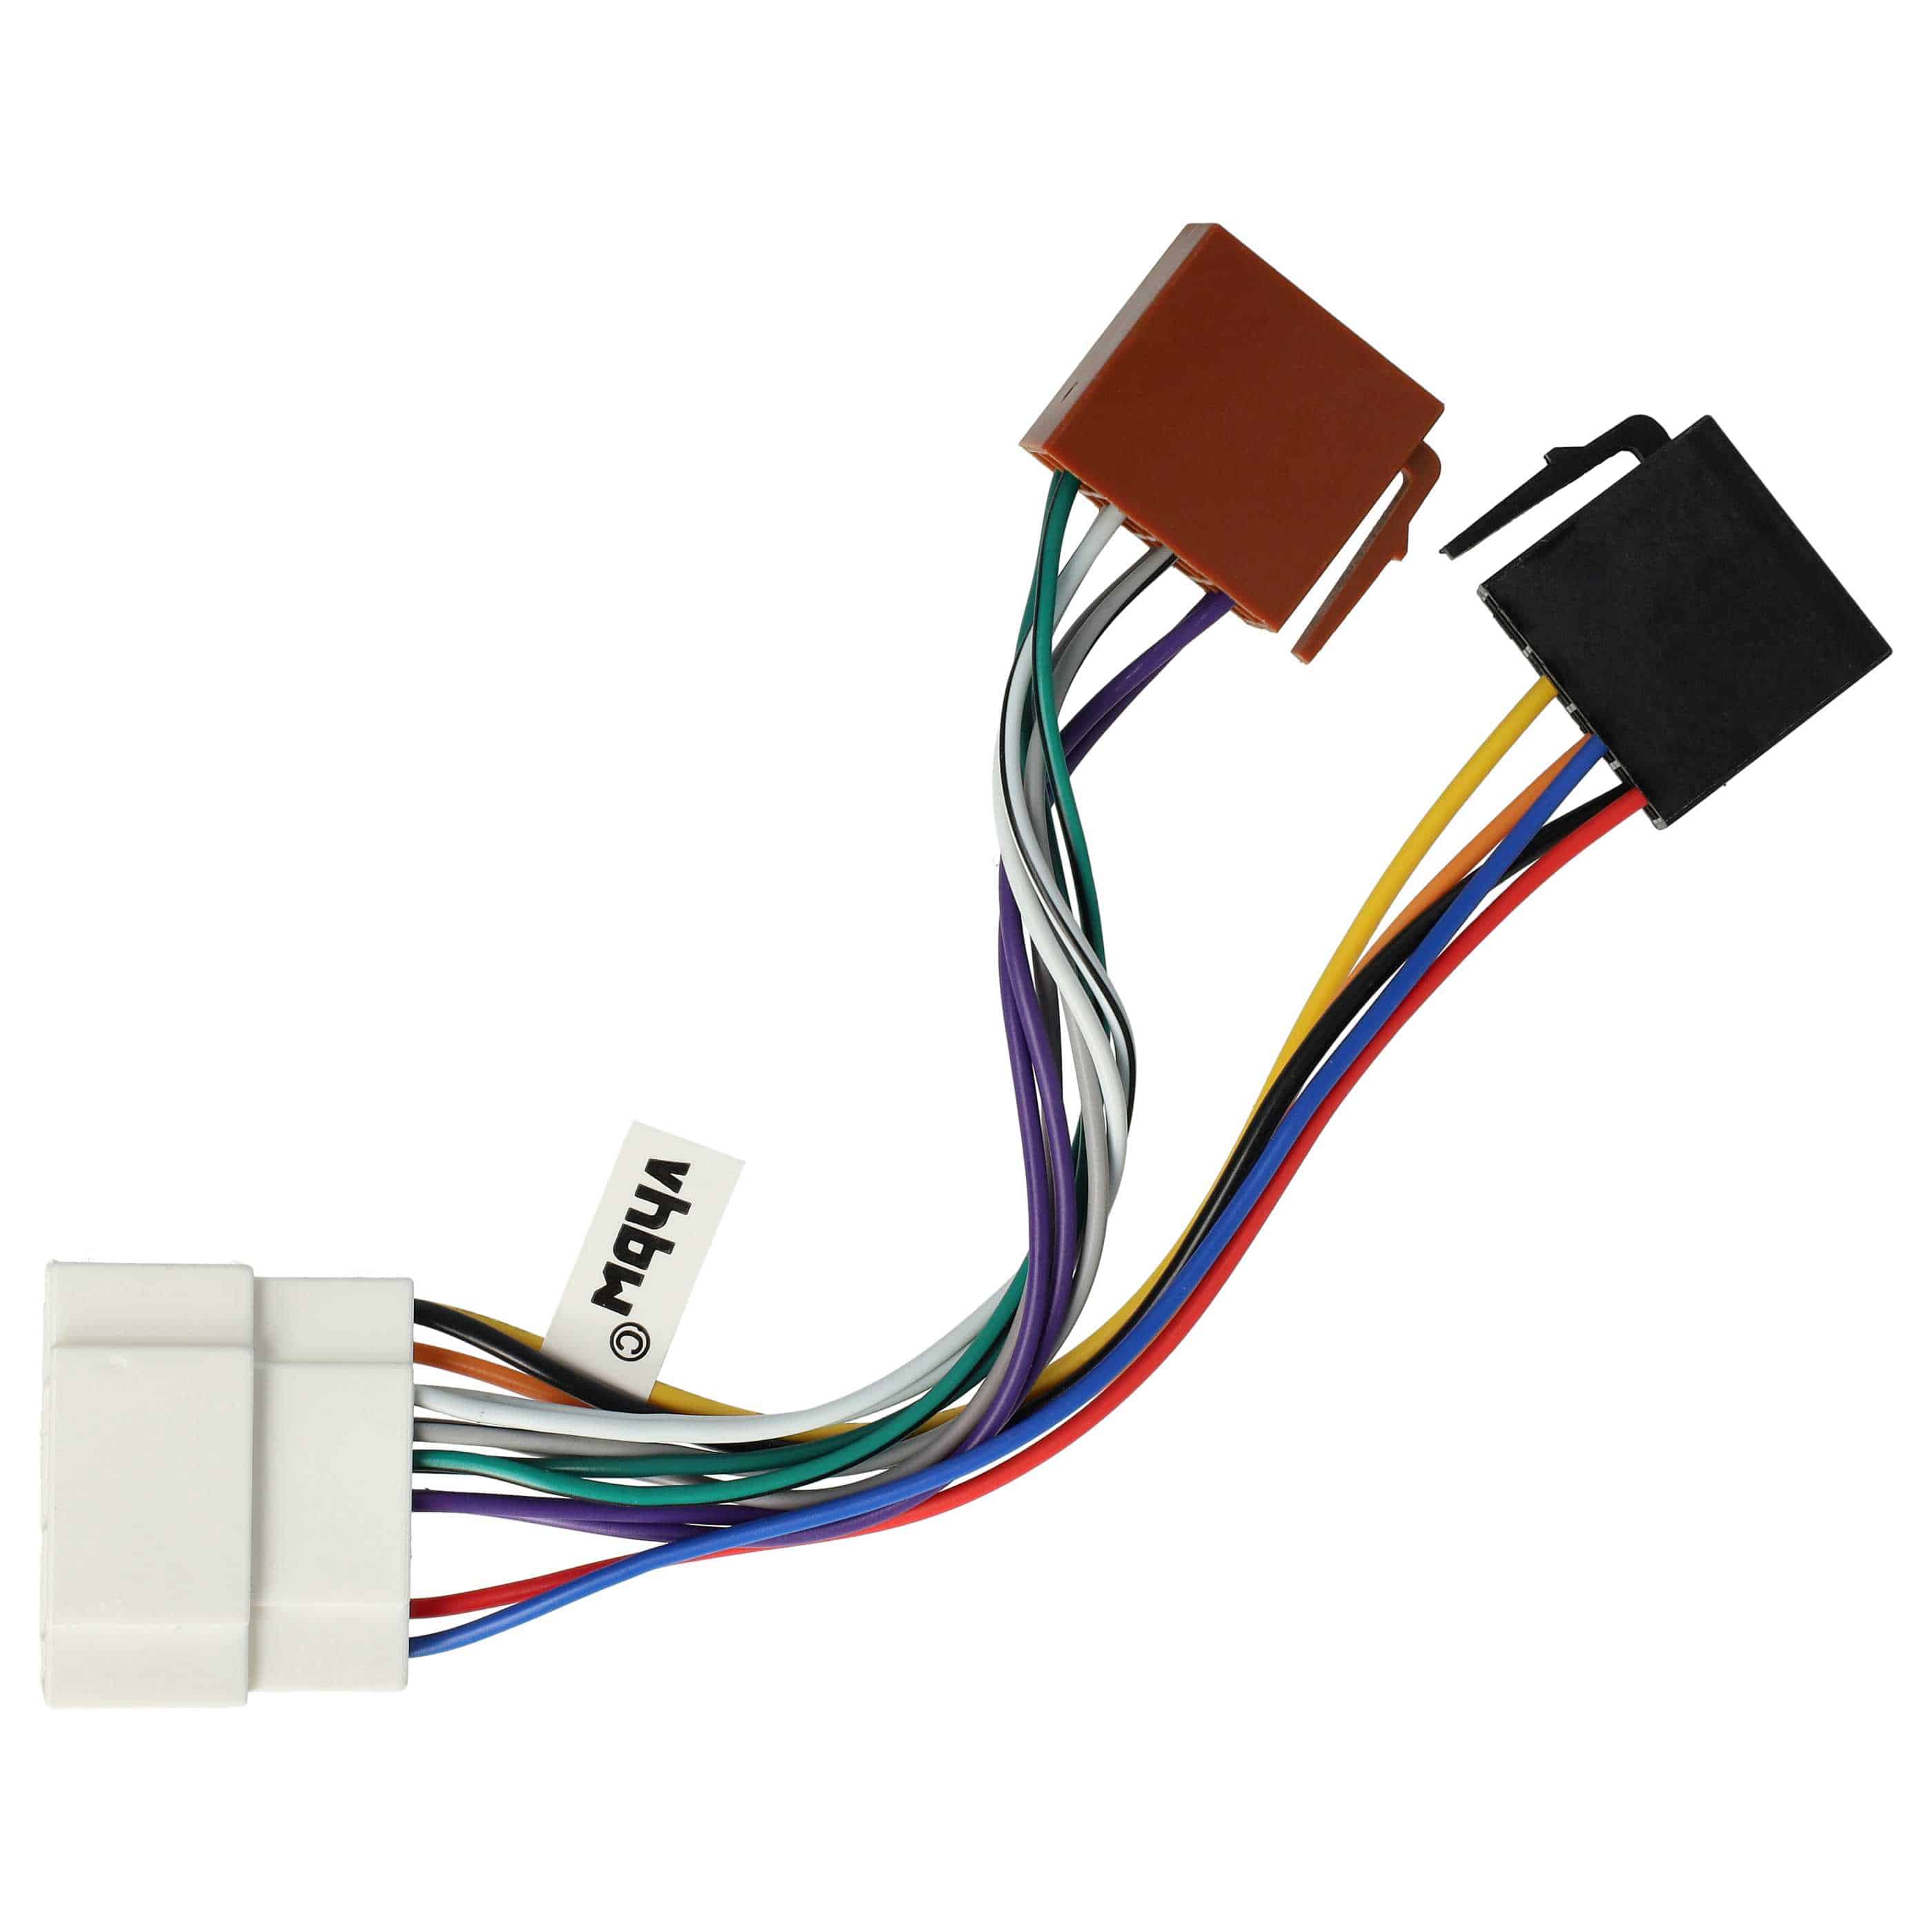 ISO Adapter suitable for 1998 - 2006 HondaCar Radio etc. - ISO 10487 Plug